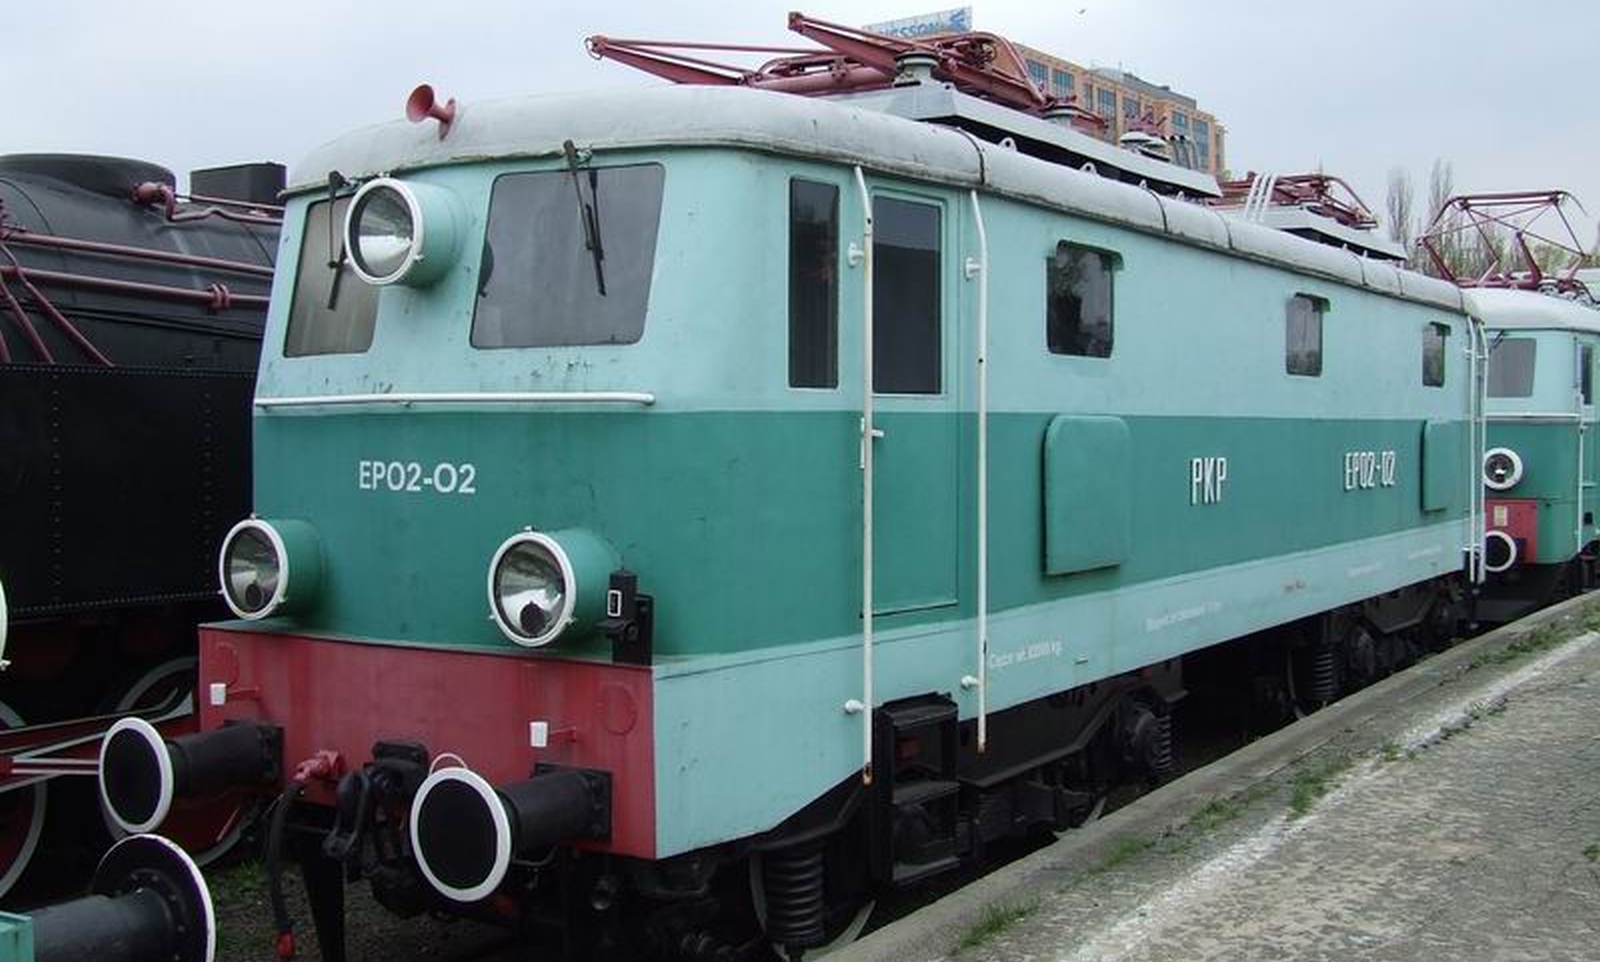 The preserved EP02 02 in the year 2002